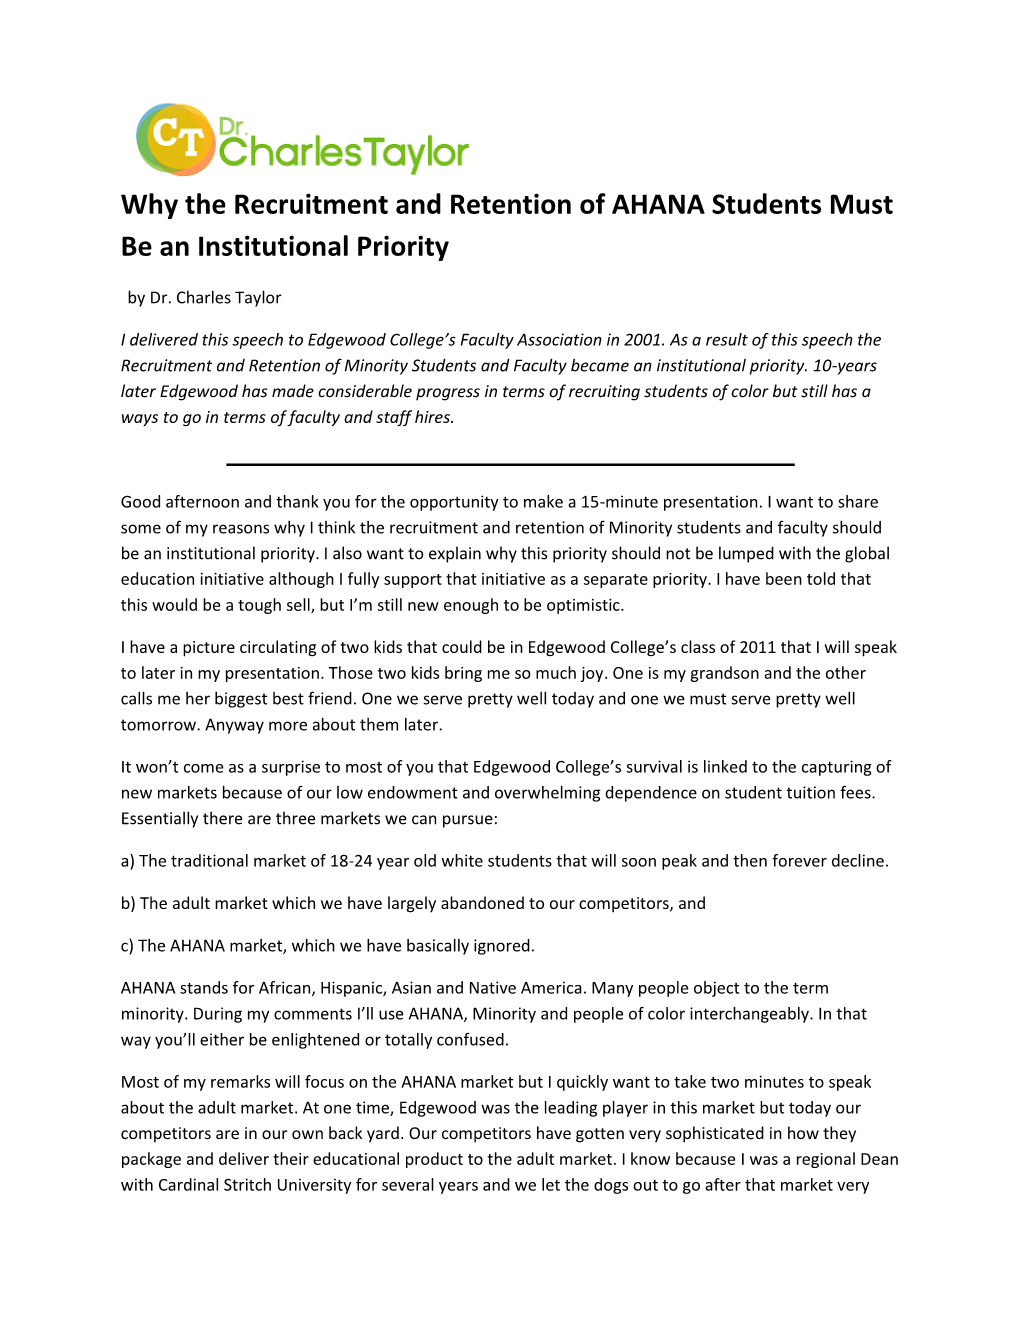 Why the Recruitment and Retention of AHANA Students Must Be an Institutional Priority